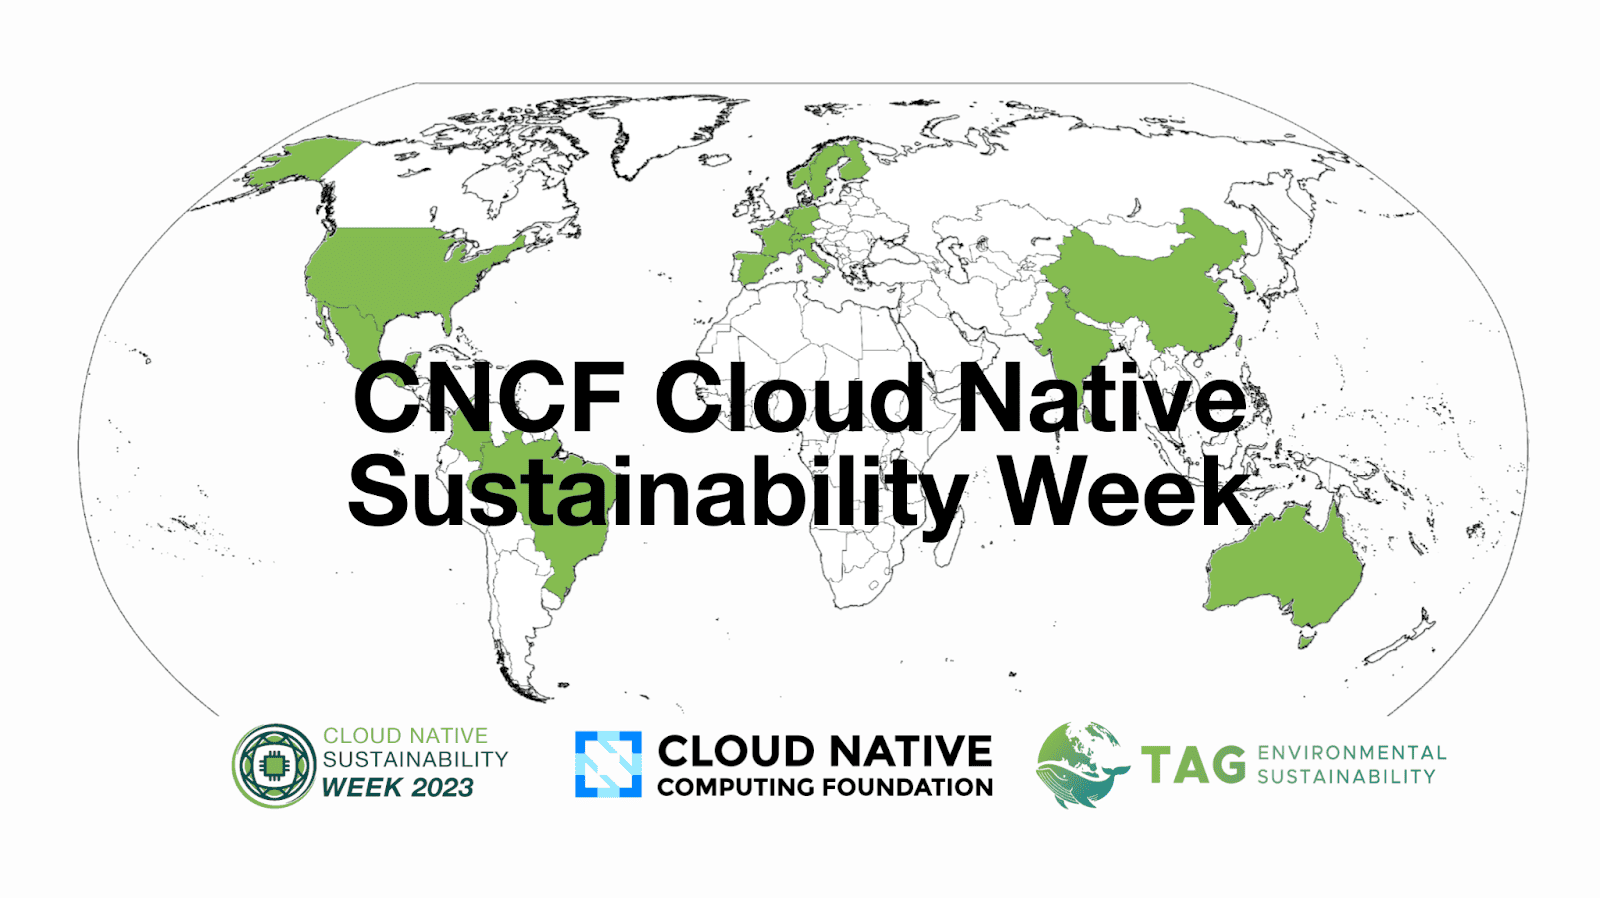 CNCF cloud native sustainability week